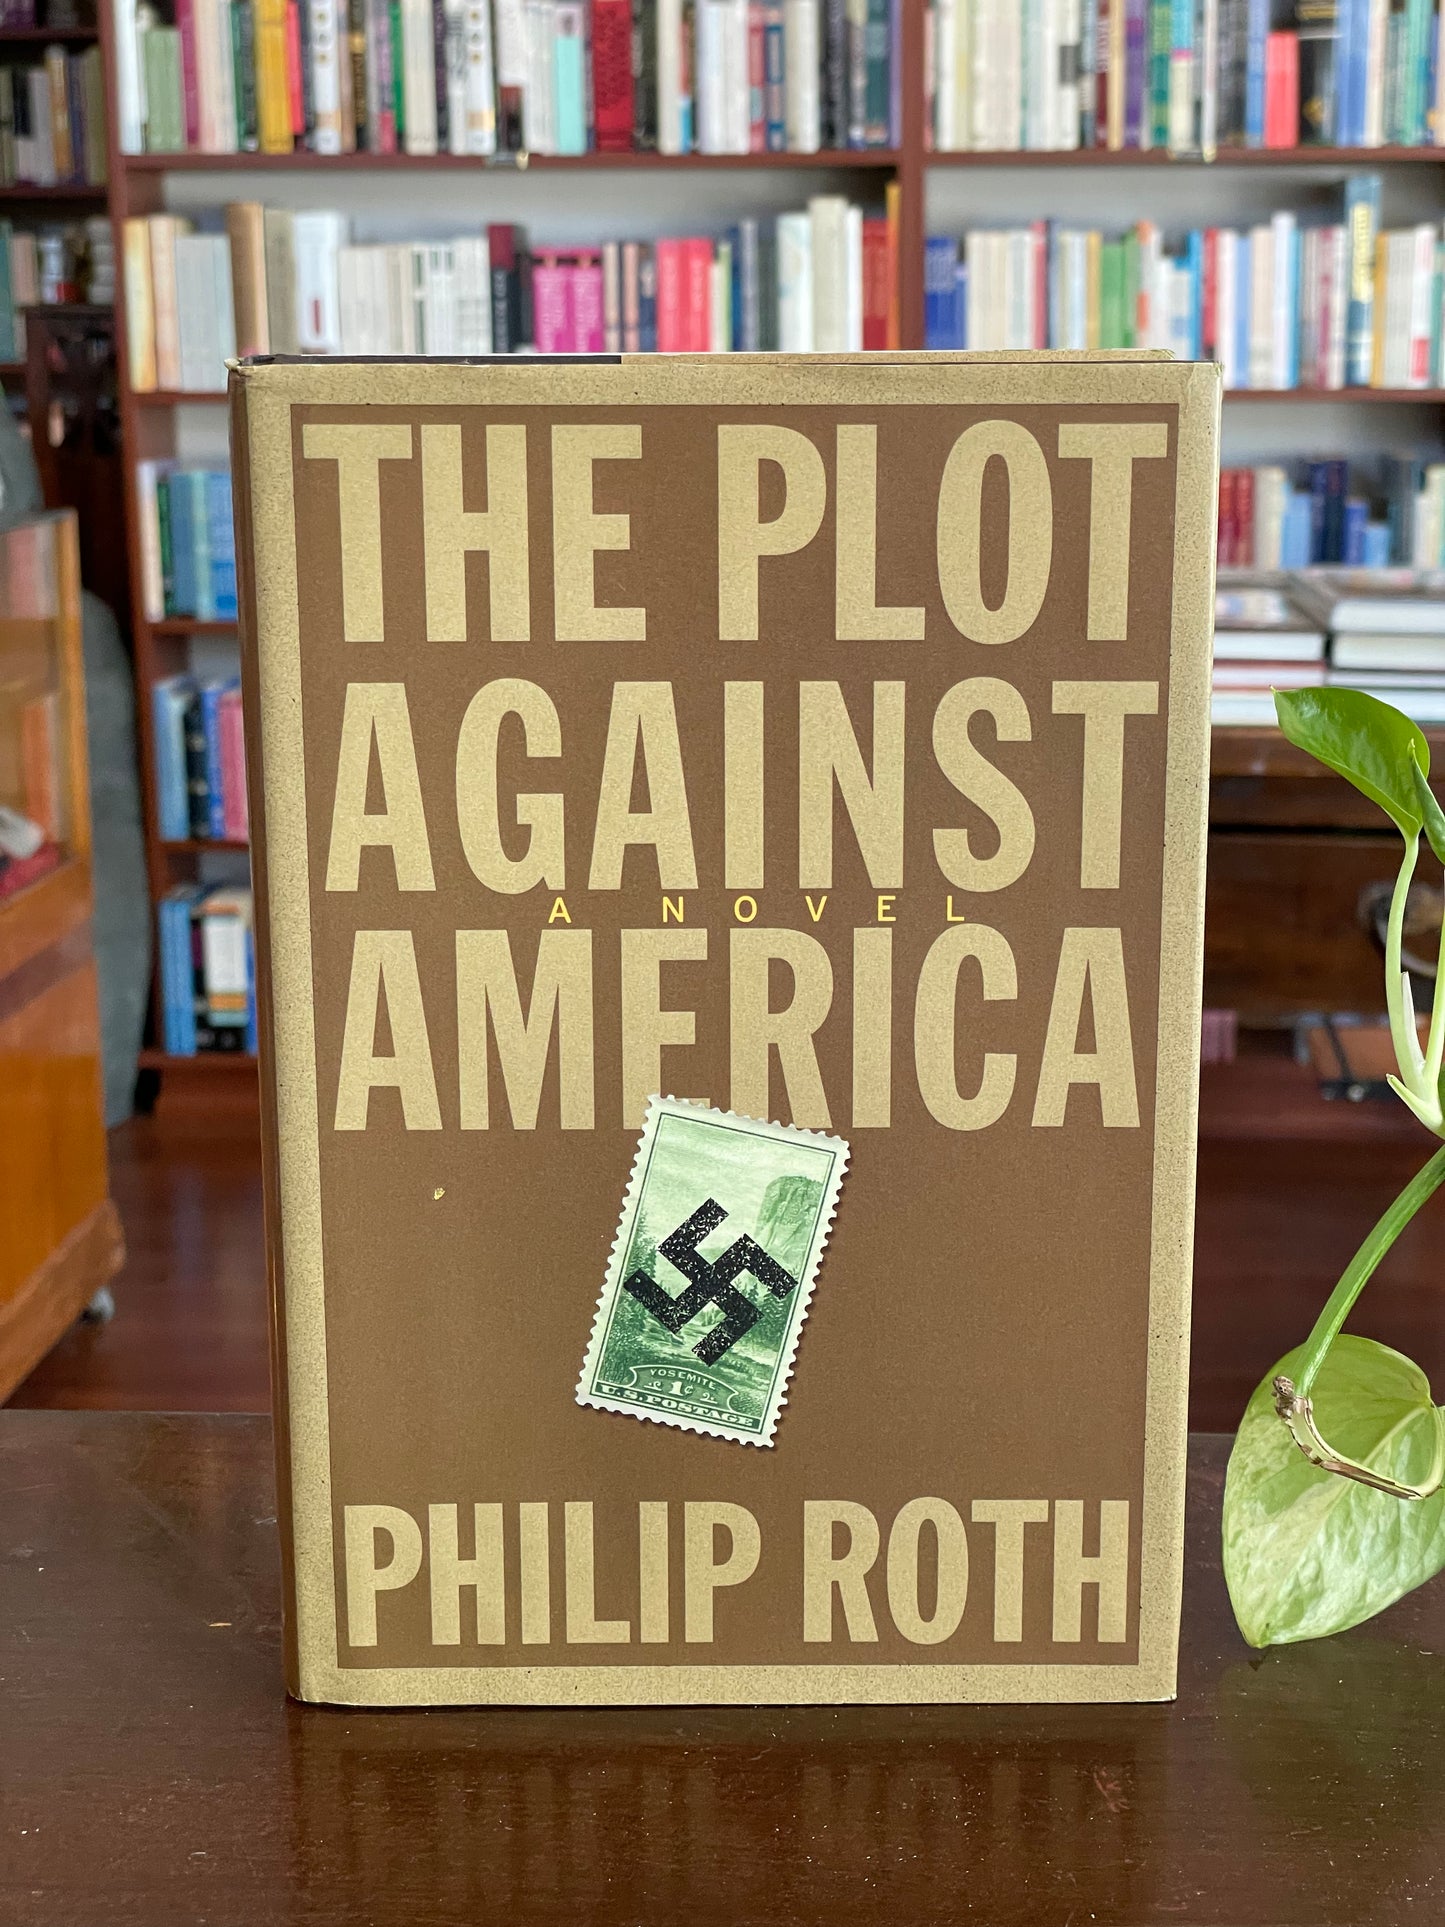 The Plot Against America by Philip Roth (first edition)